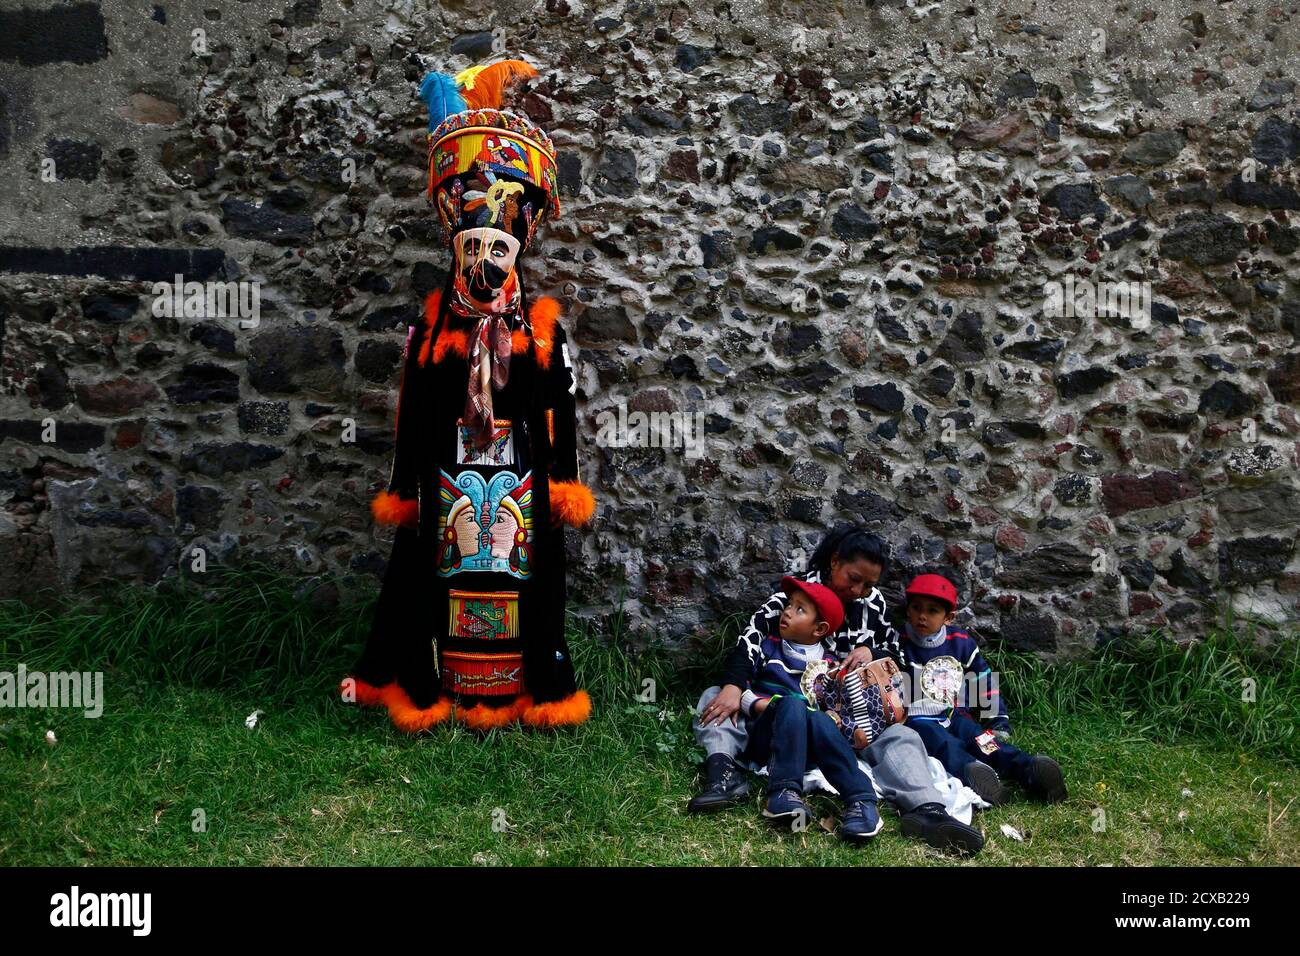 A boy sitting with his family looks up at a traditional Chinelo costumed  dancer during a celebration 40 days after the birth of Jesus, in Xochimilco  on the outskirts of Mexico City,